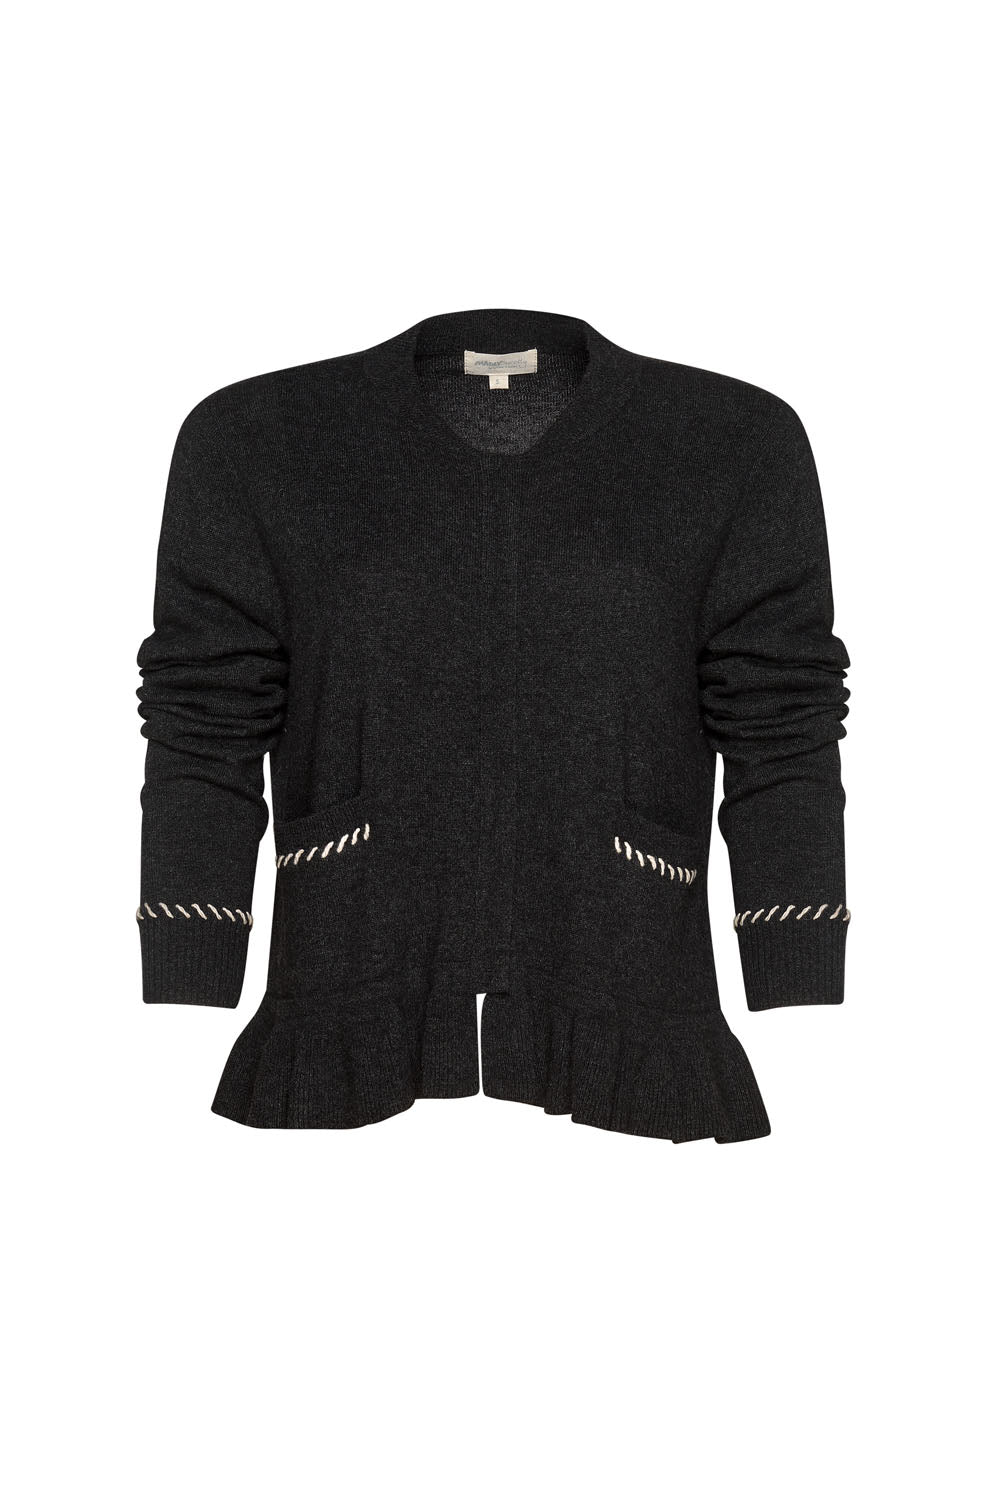 MADLY SWEETLY WHIPPED UP CARDI - BLACK - THE VOGUE STORE